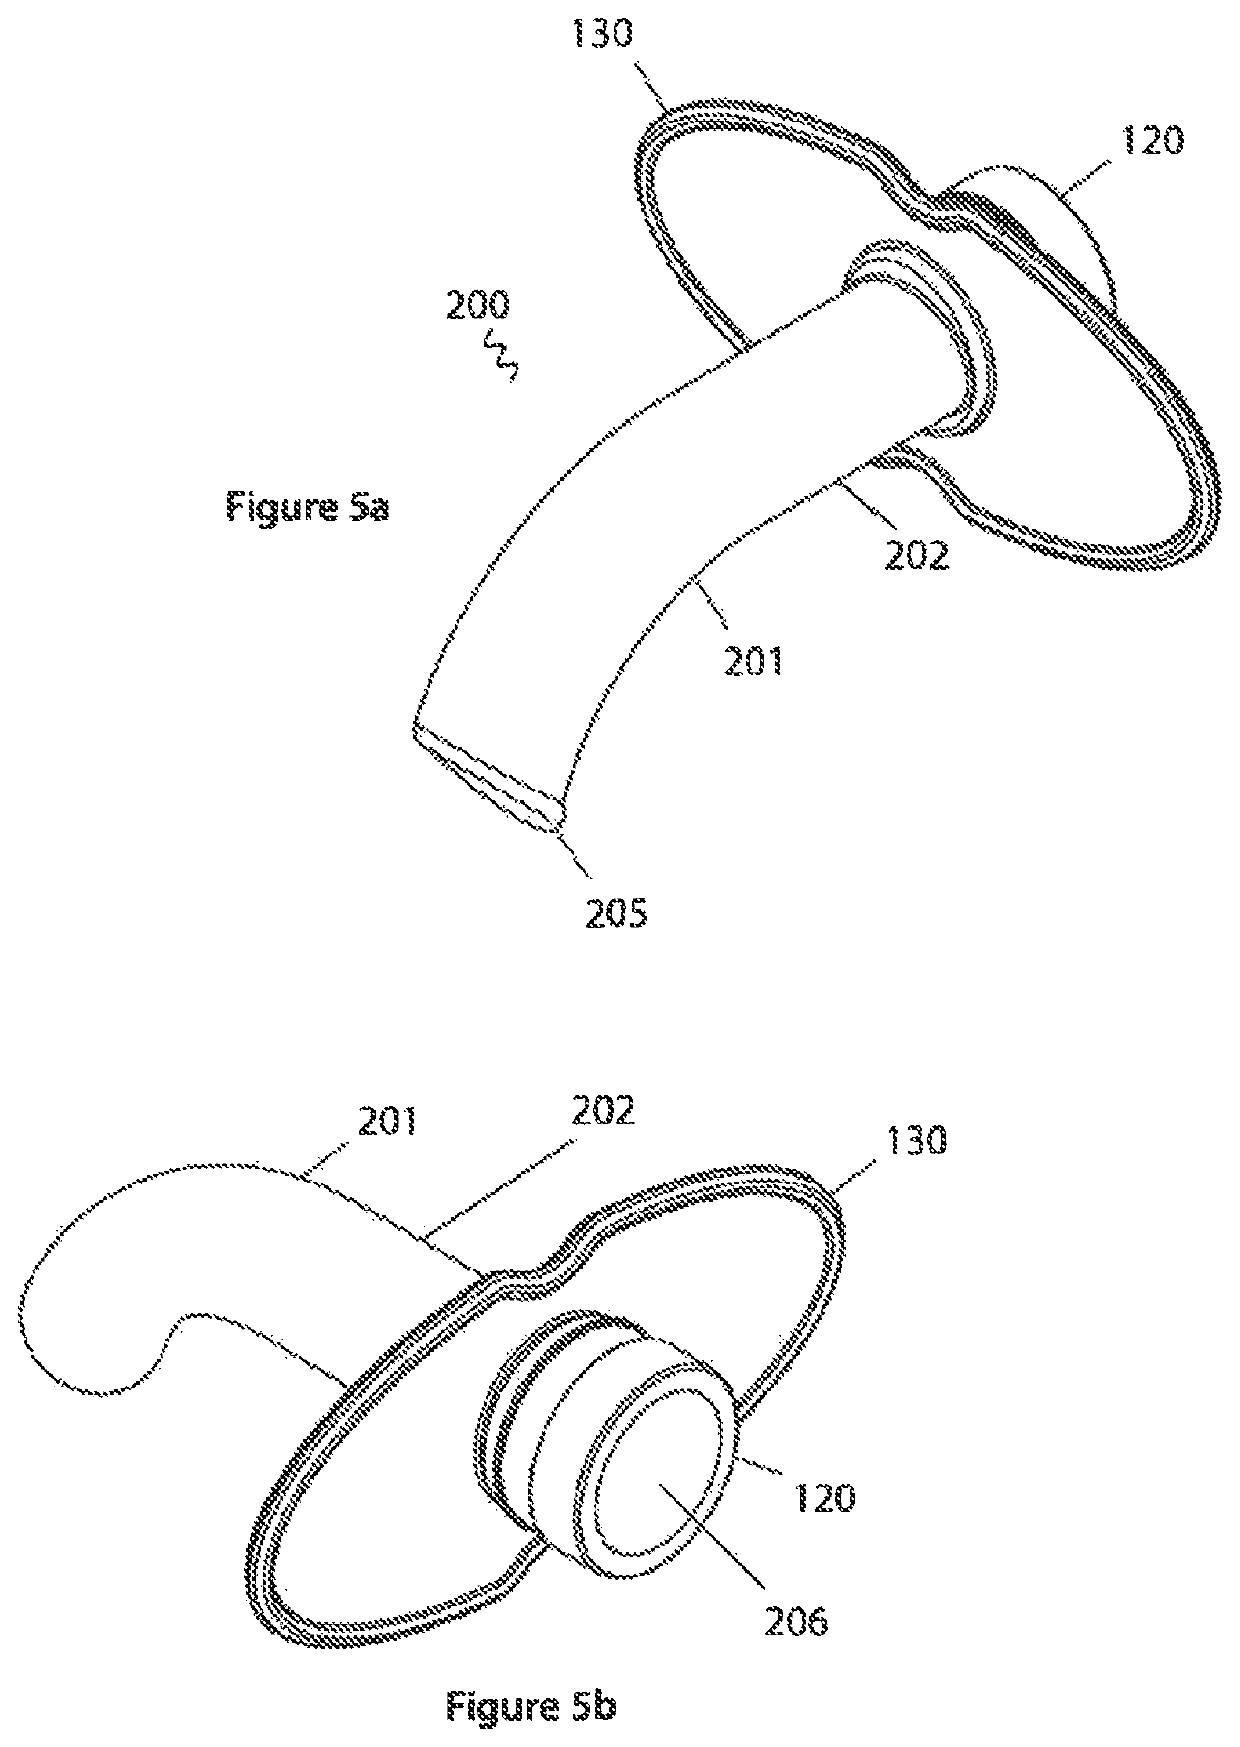 Sealing mechanism for anaesthetic airway devices